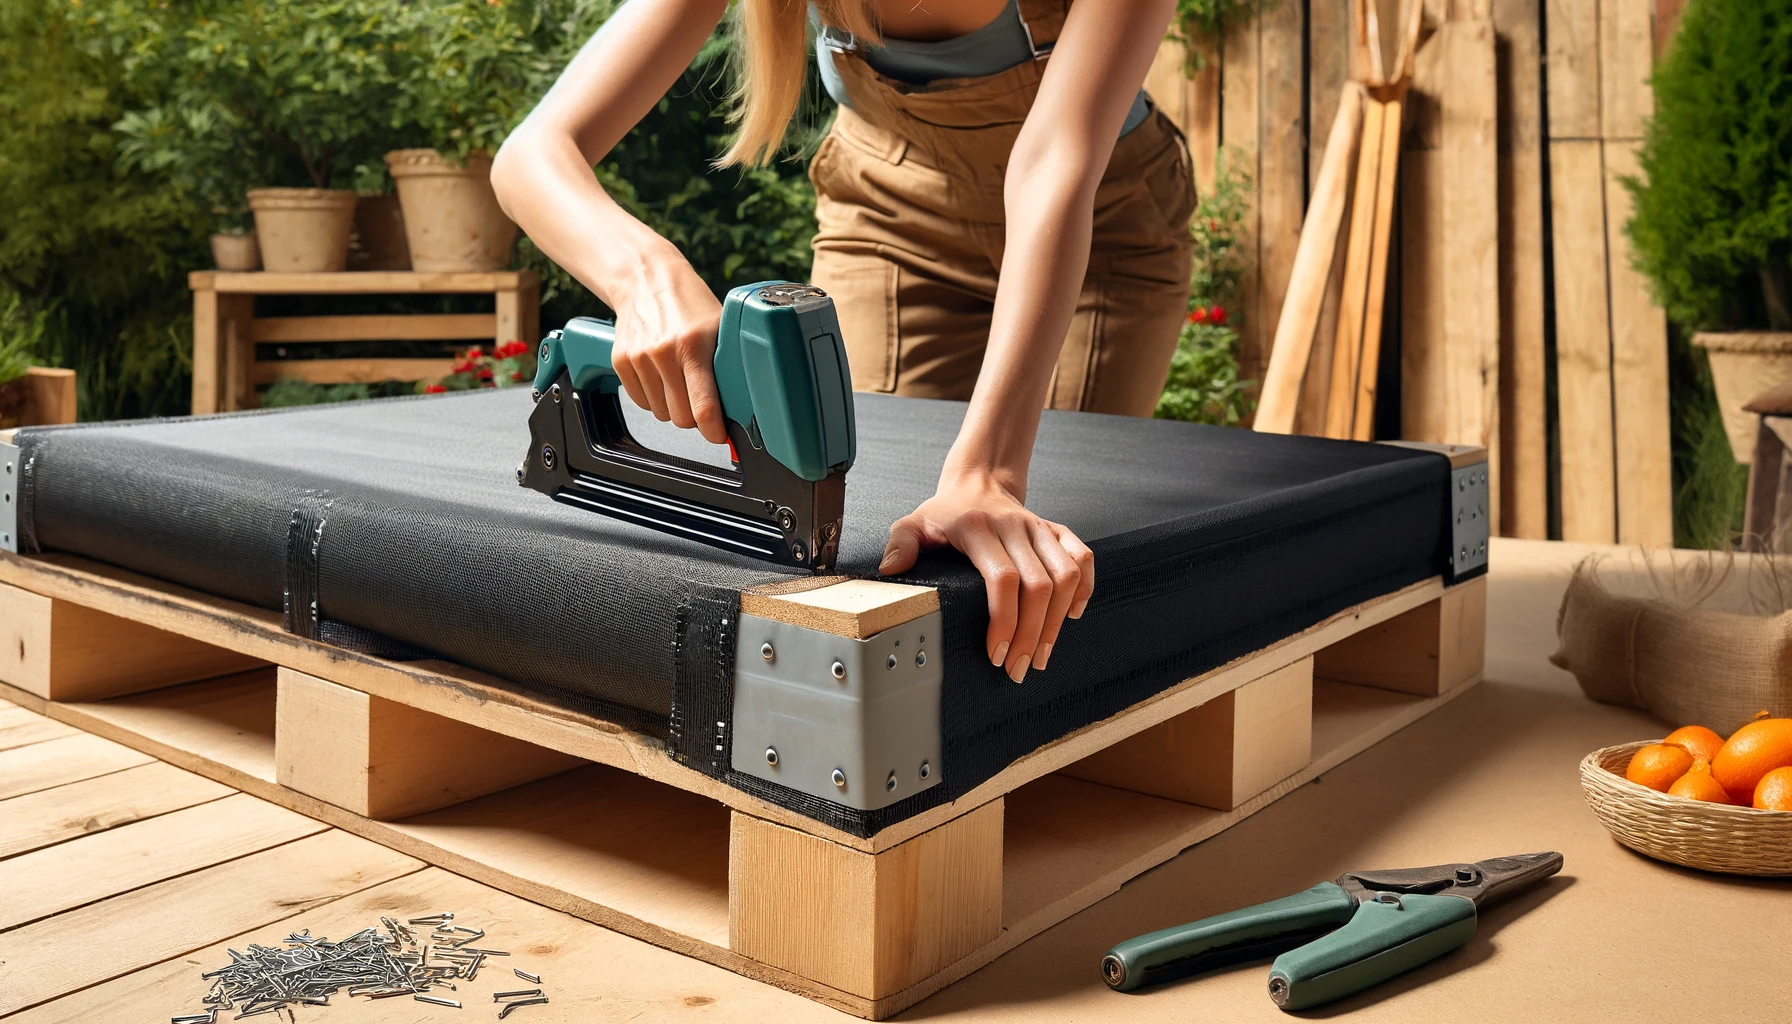 Cut the landscape fabric to cover the back, bottom, and sides of the pallet. This fabric will hold the soil in and prevent it from spilling out. Use a staple gun to securely attach the fabric, making sure there are no gaps for soil to leak through.